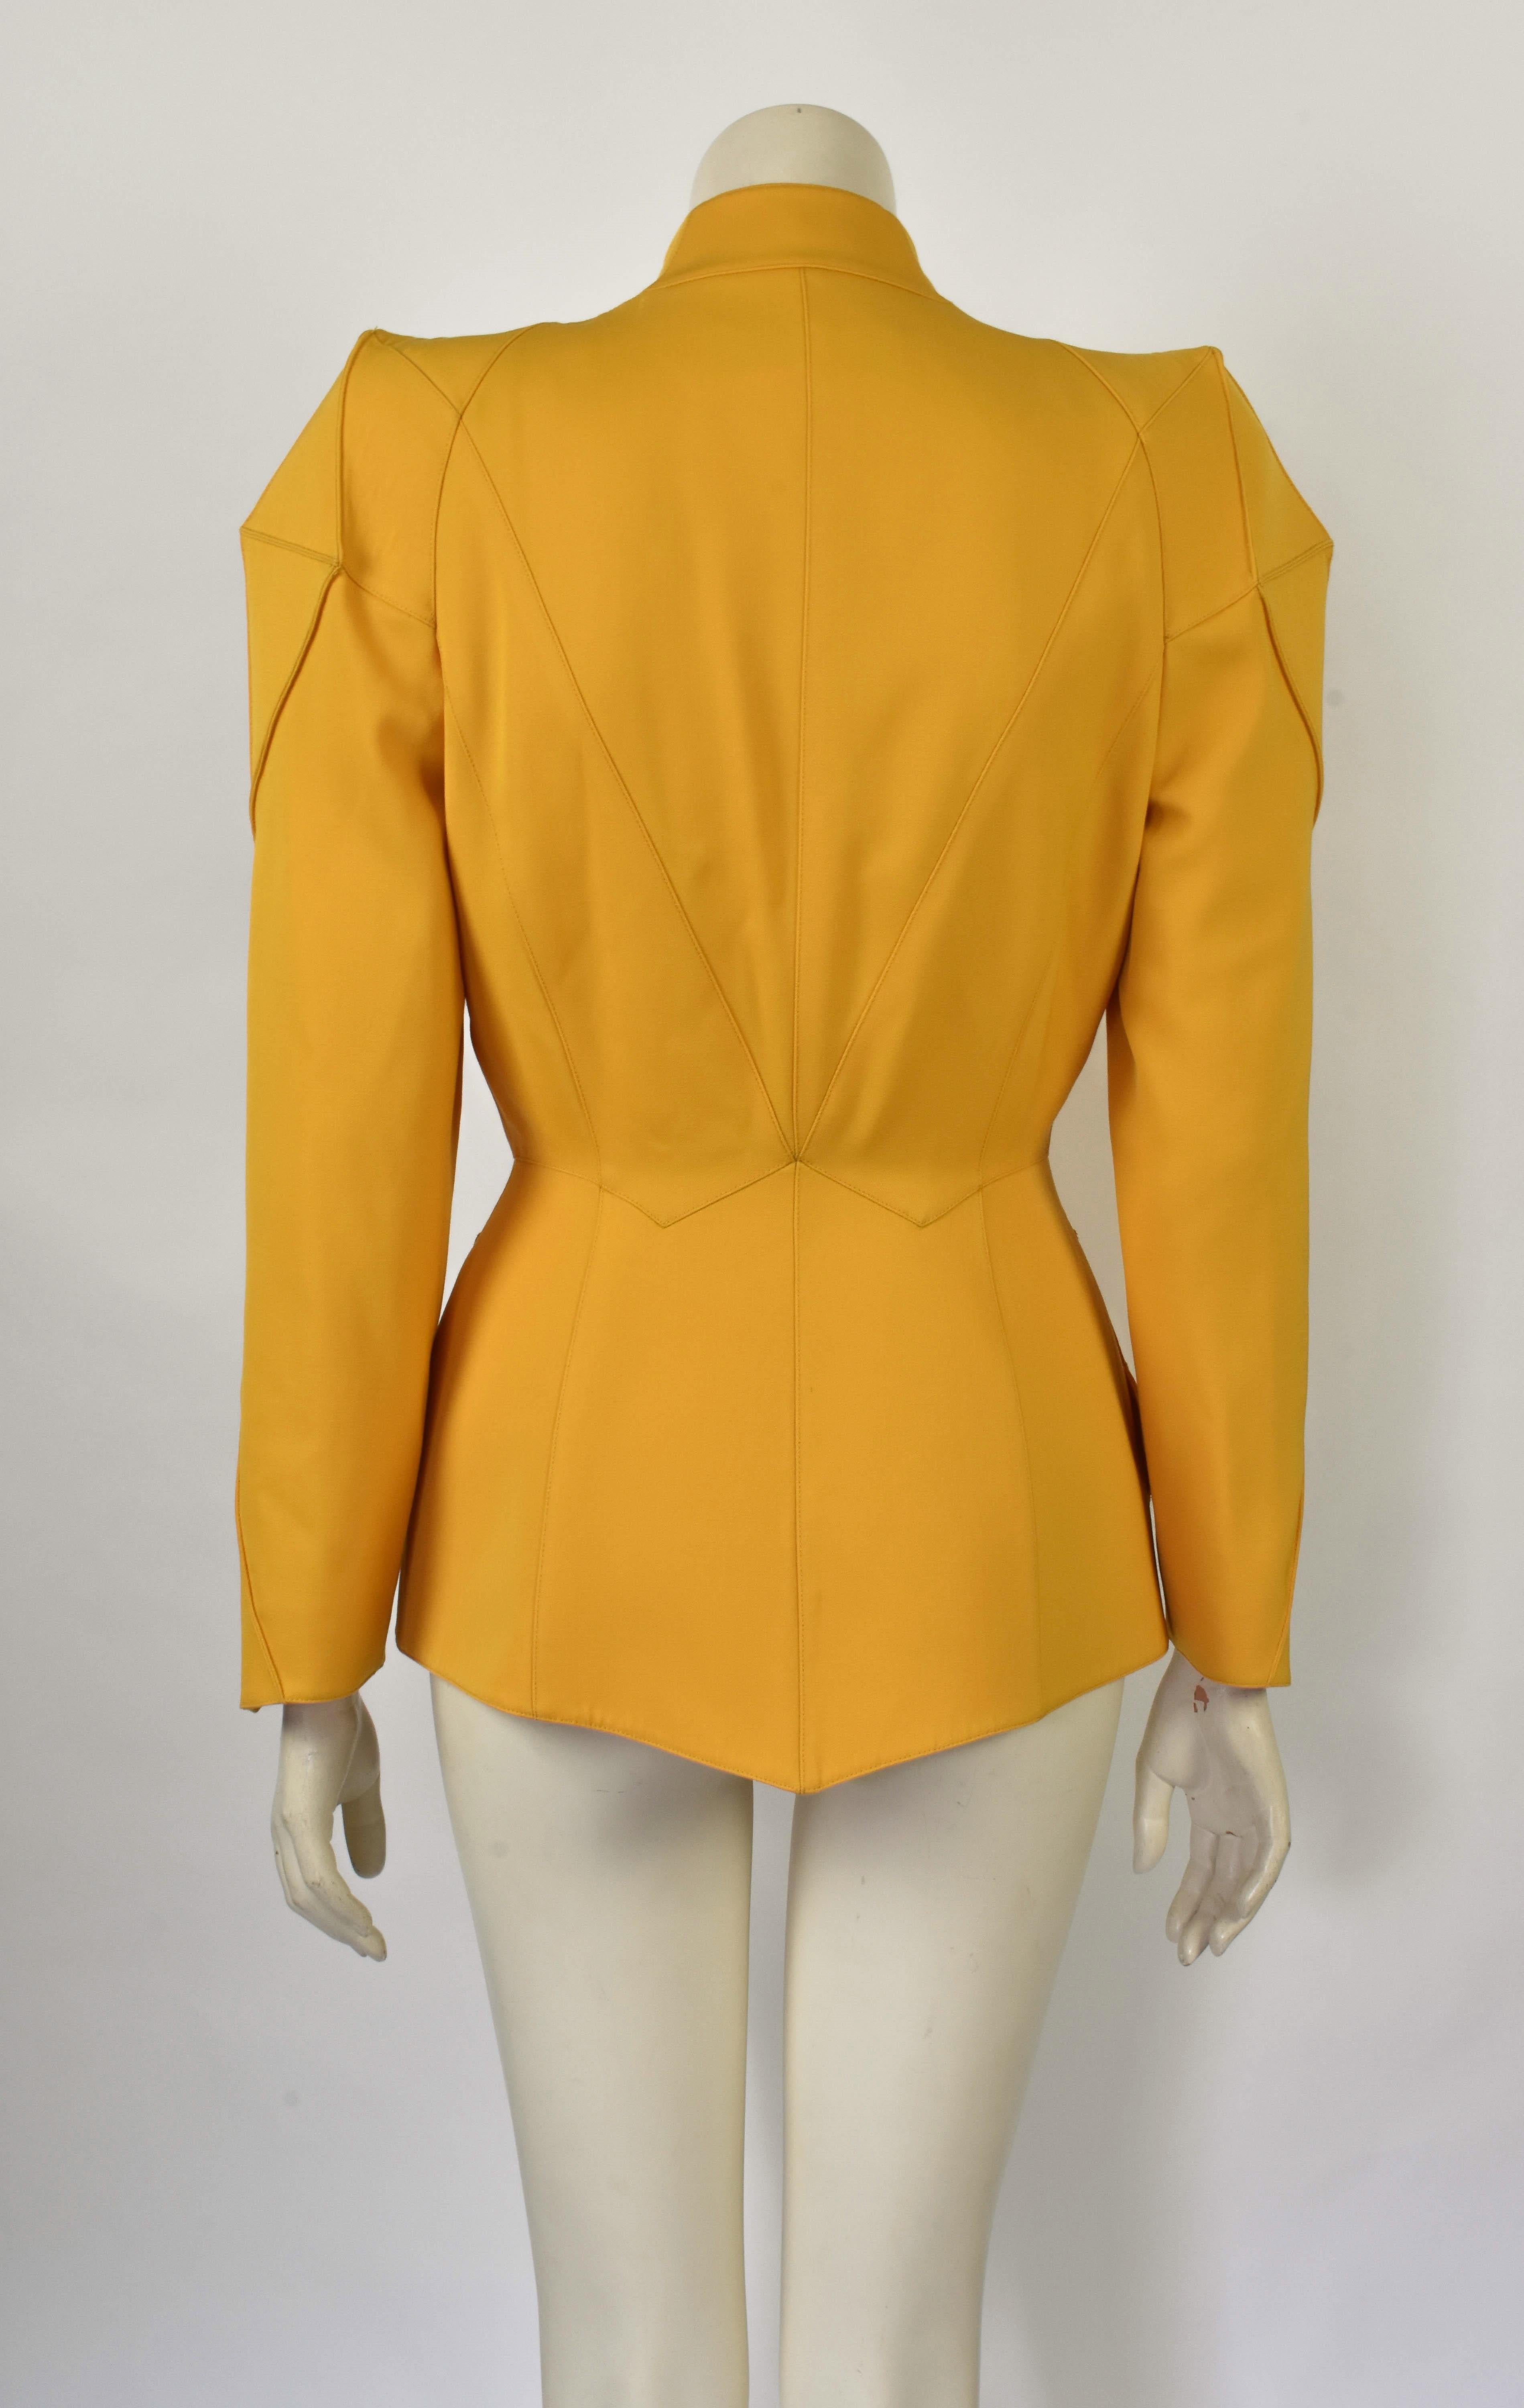 FINAL SALE 1980s Thierry Mugler Sculptural Yellow Blazer with Star Pockets In Good Condition For Sale In Amsterdam, NL